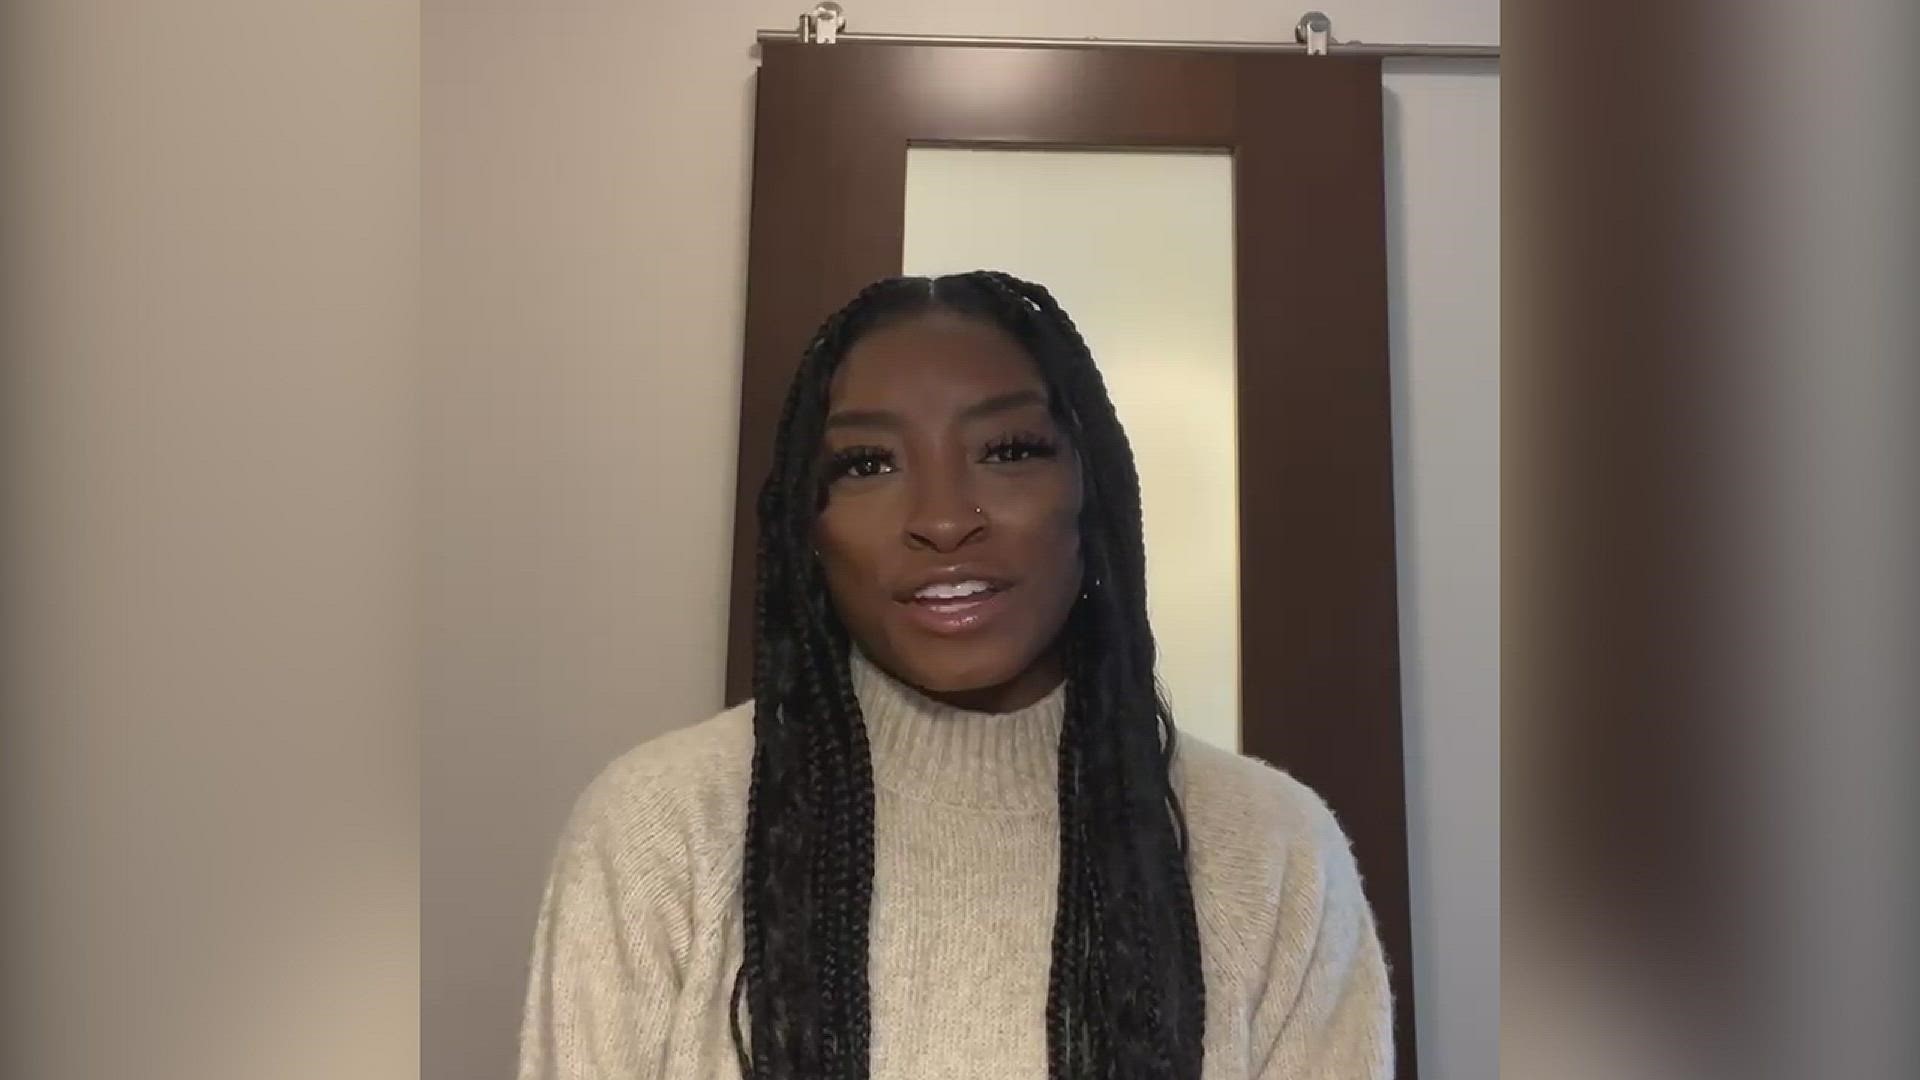 It’s National Adoption Month and gymnast Simone Biles shared a video message in support of the Heart Gallery and adoption.